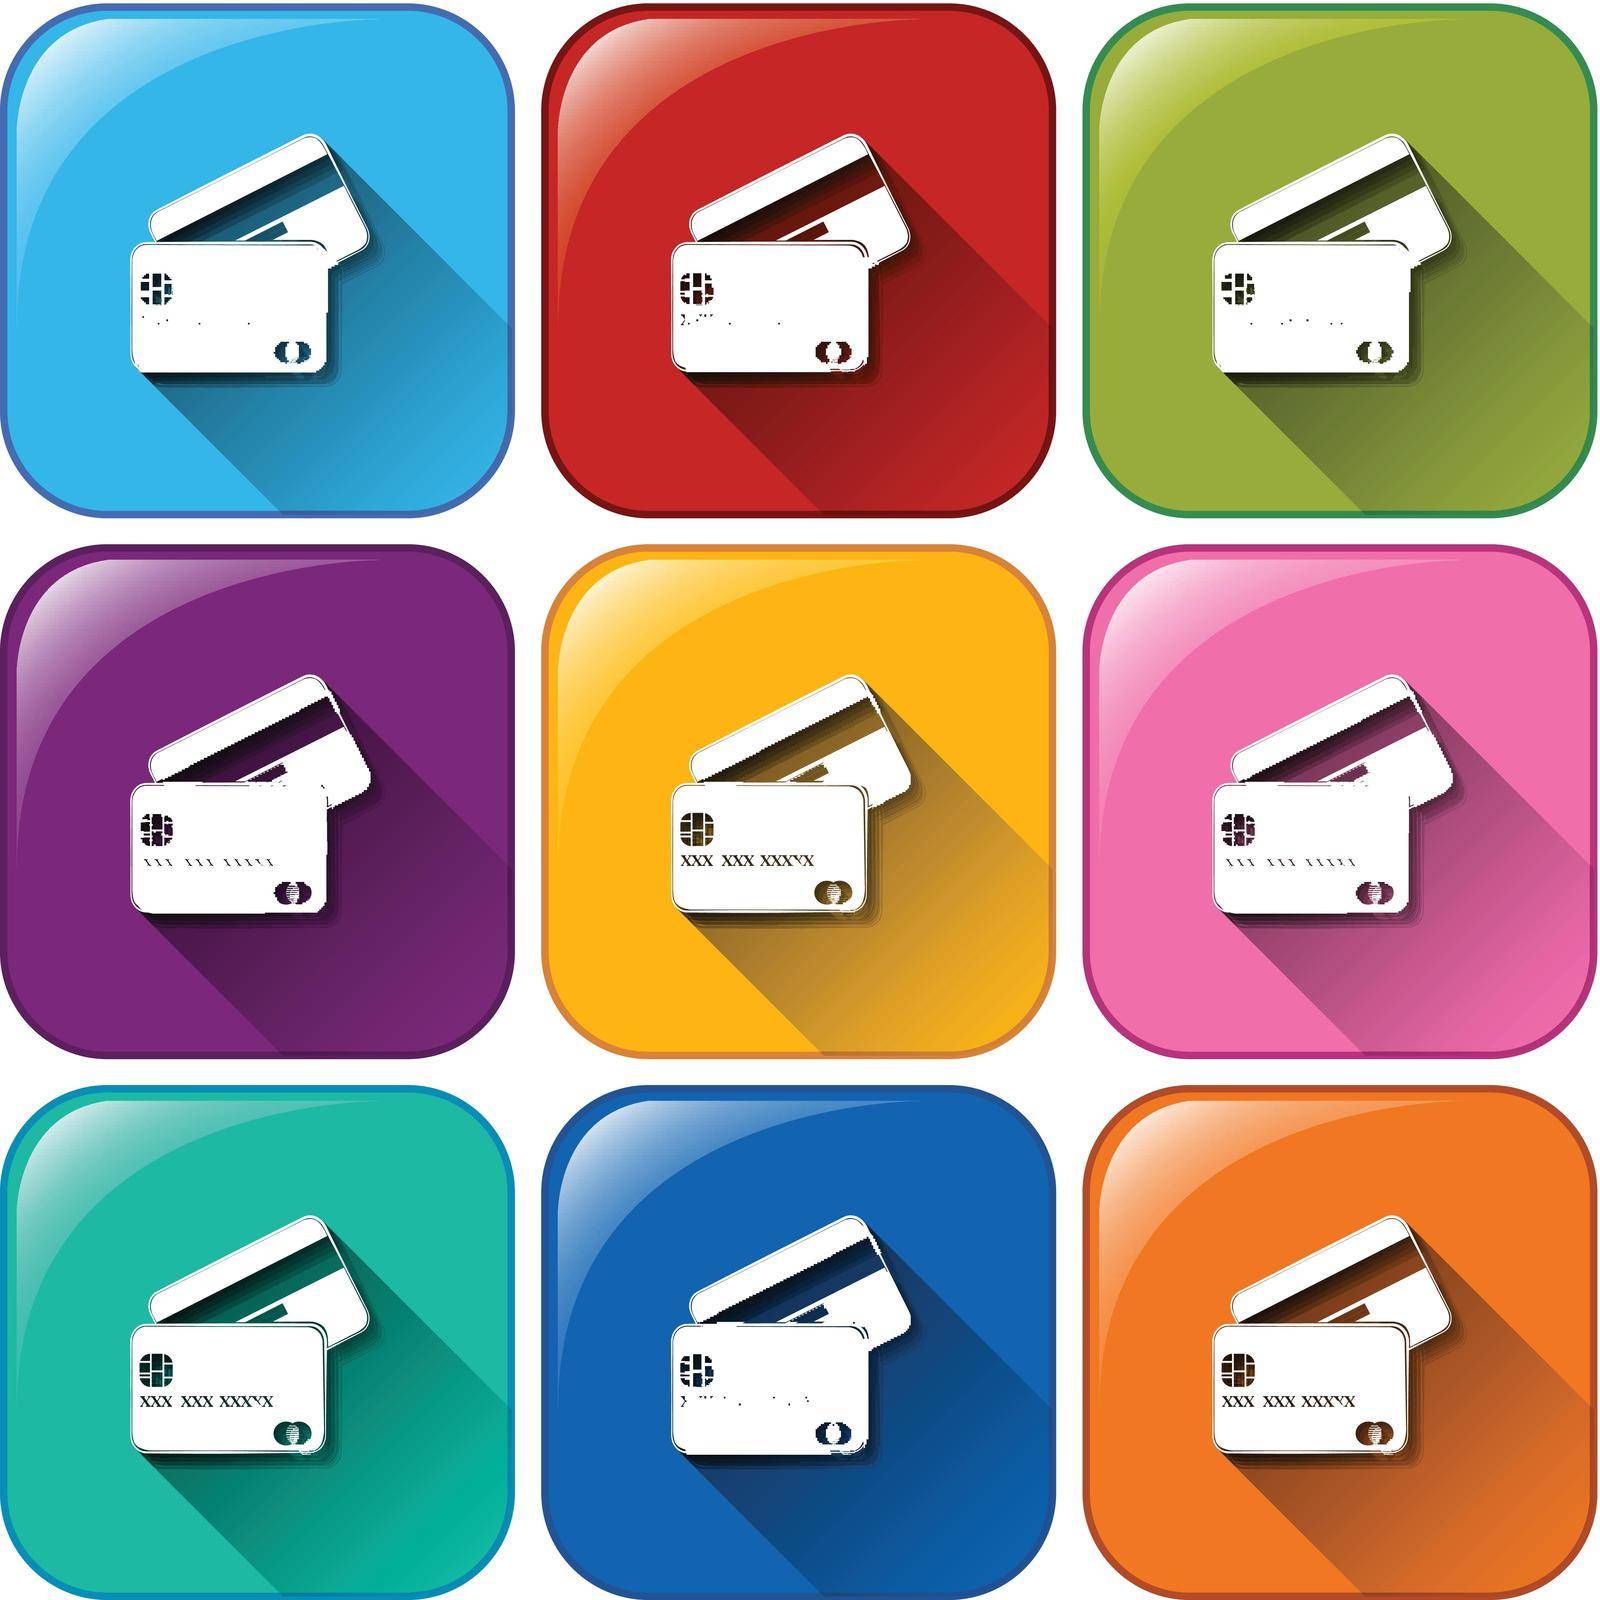 Illustration of the rounded icons with cards on a white background